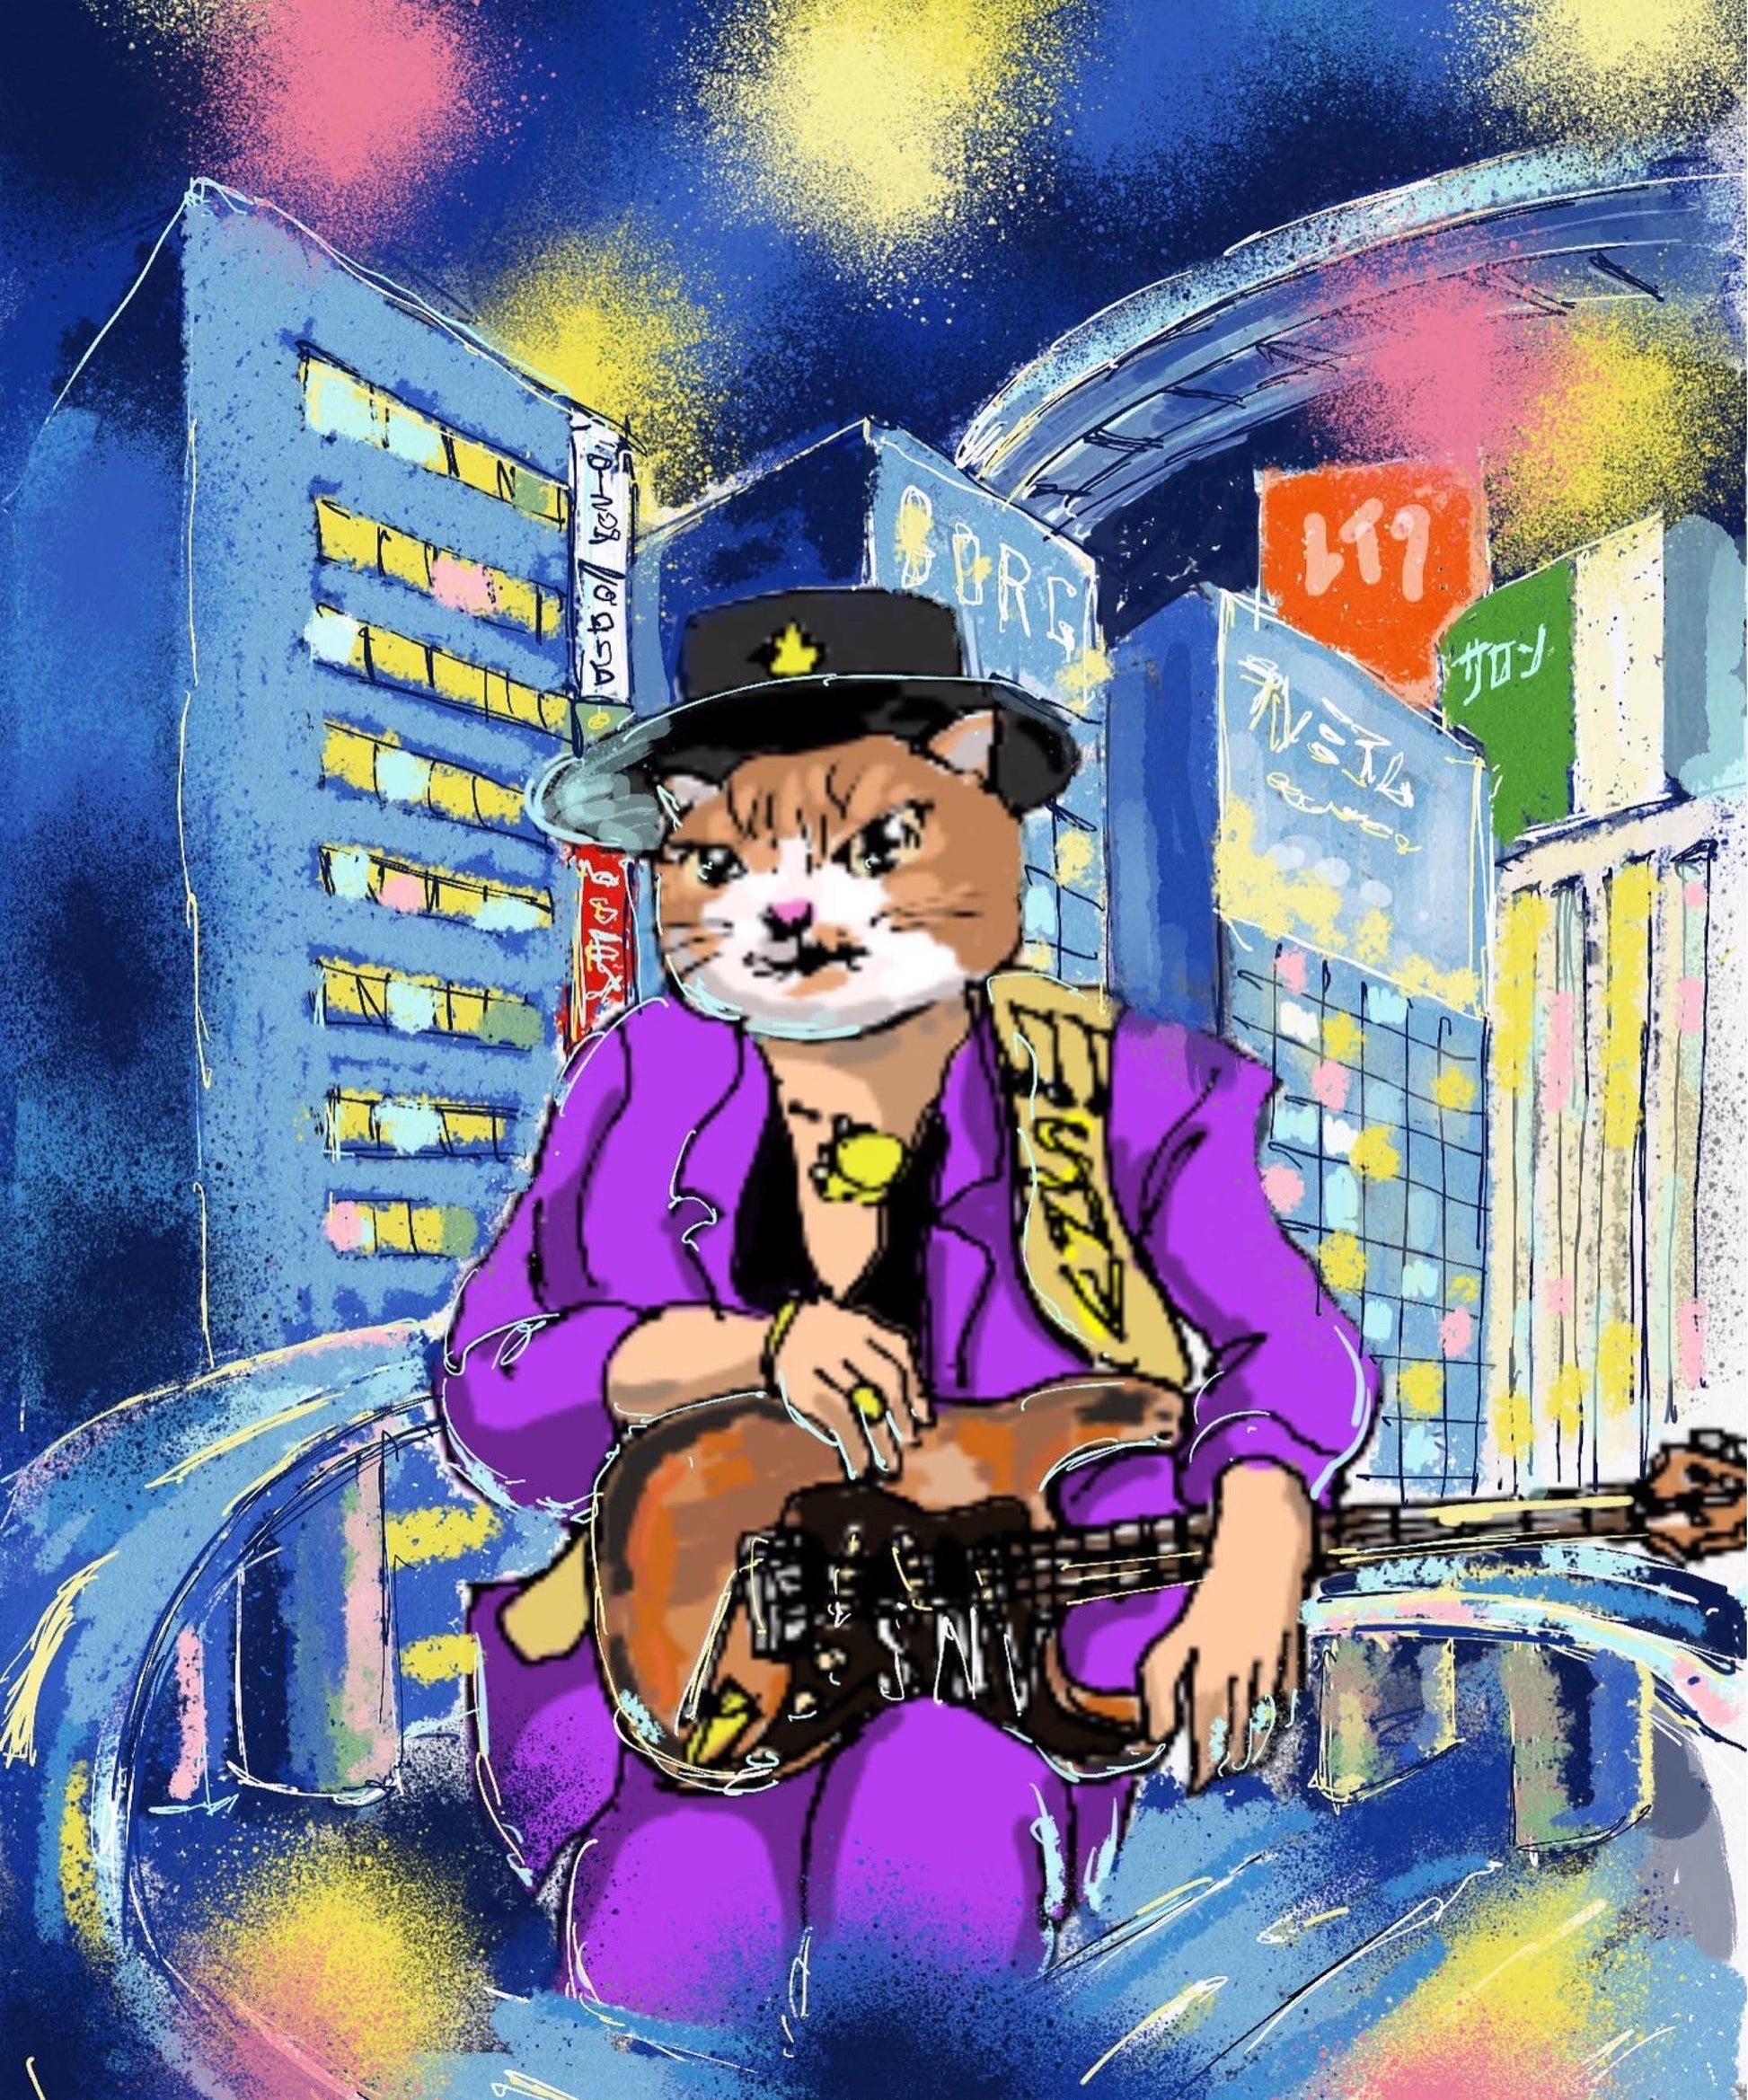 Blues cat in the city - FROM ARTIST